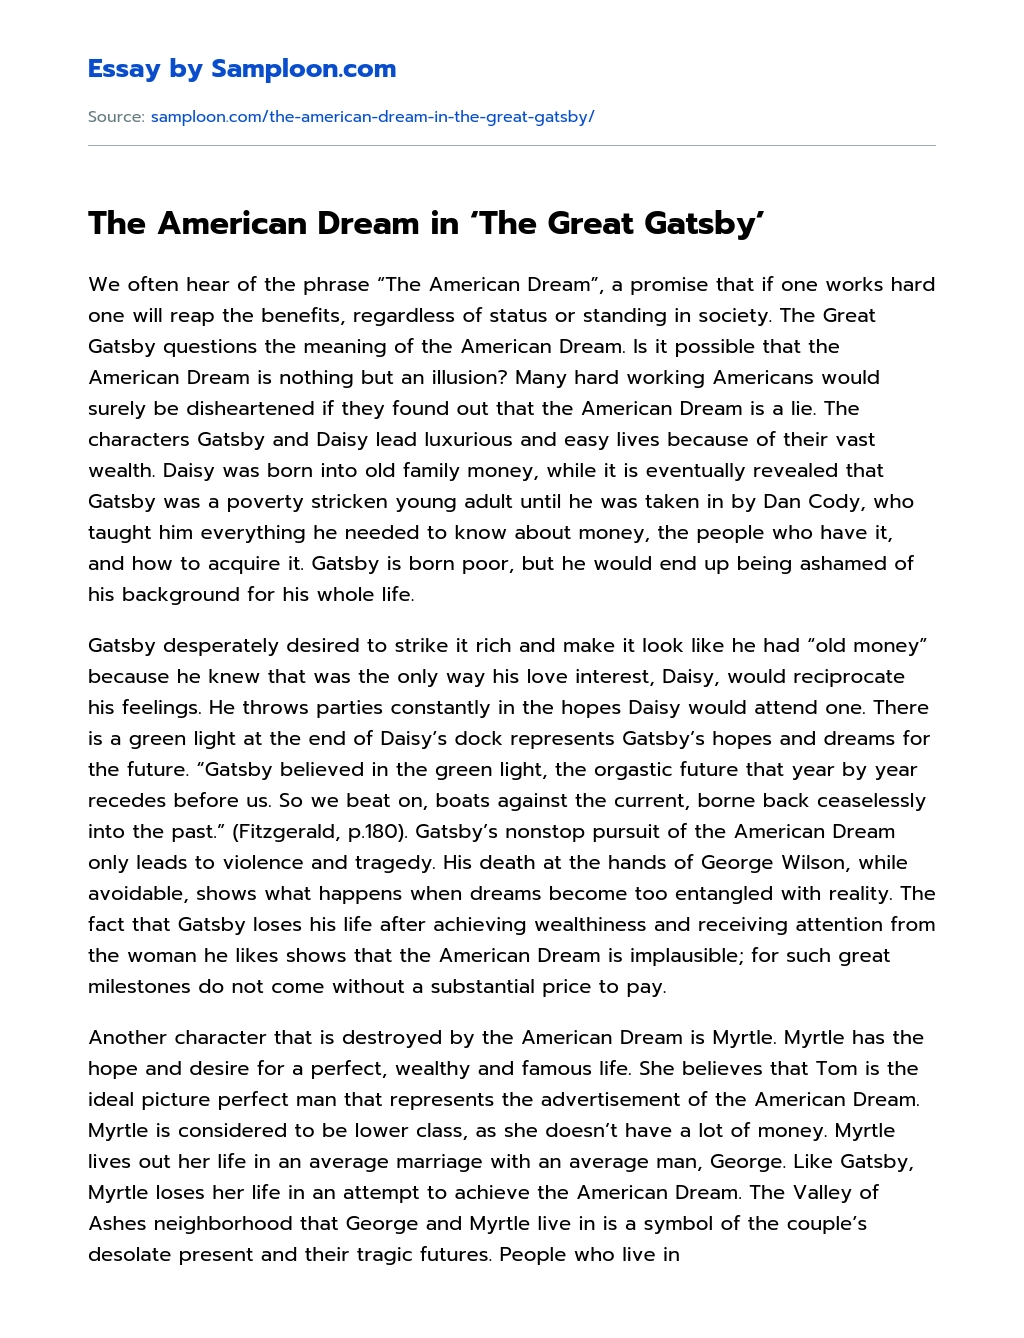 The American Dream in ‘The Great Gatsby’ essay